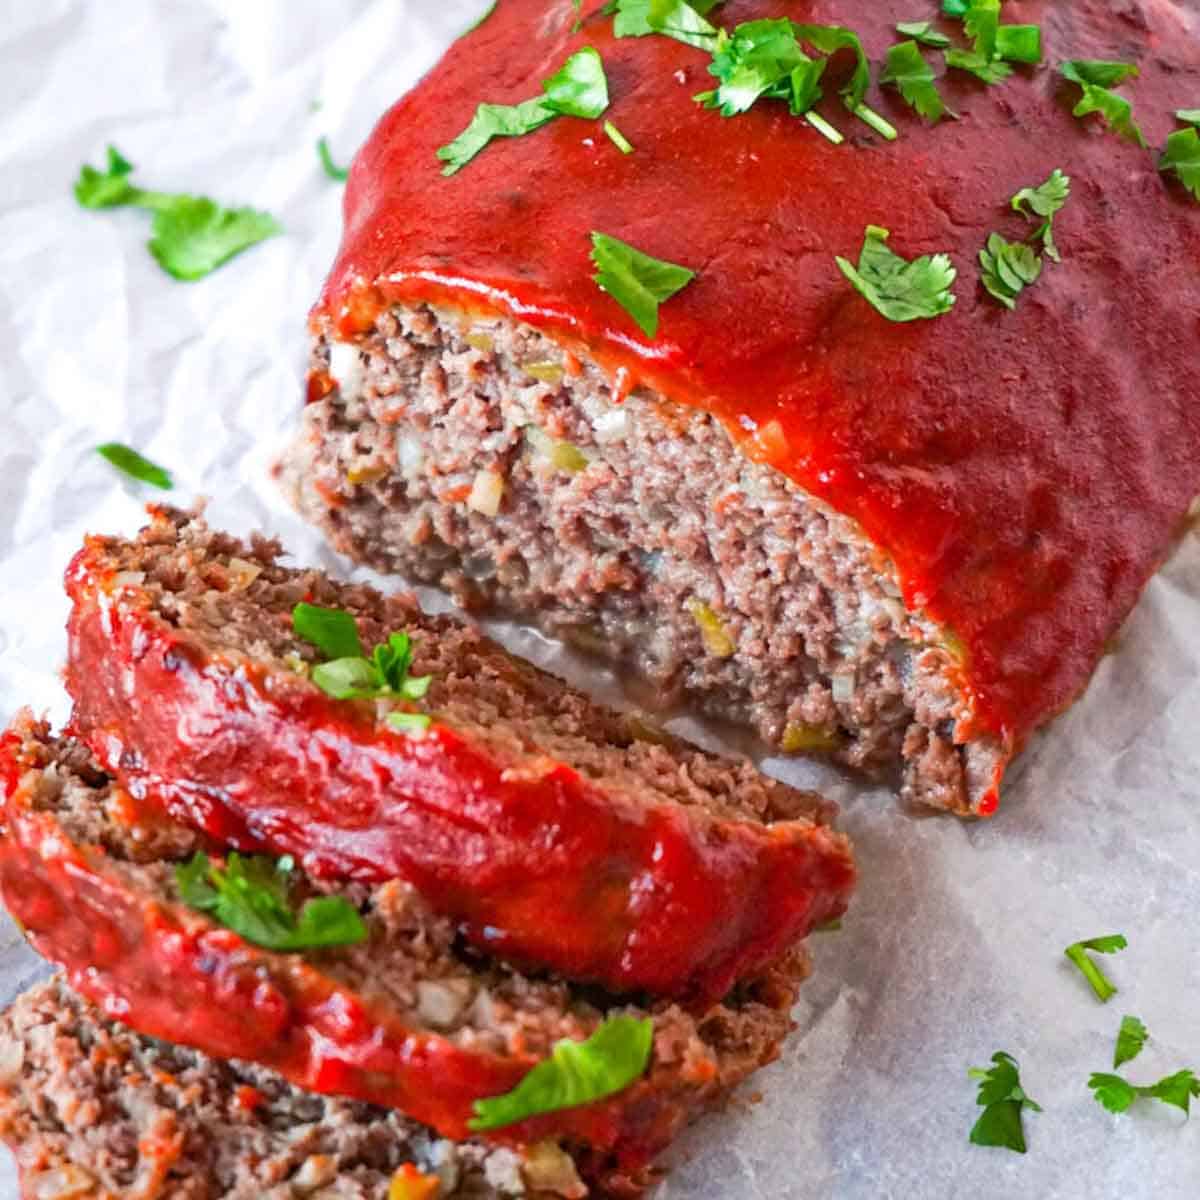 Low carb keto meatloaf recipe (Gluten-free)| Here To Cook